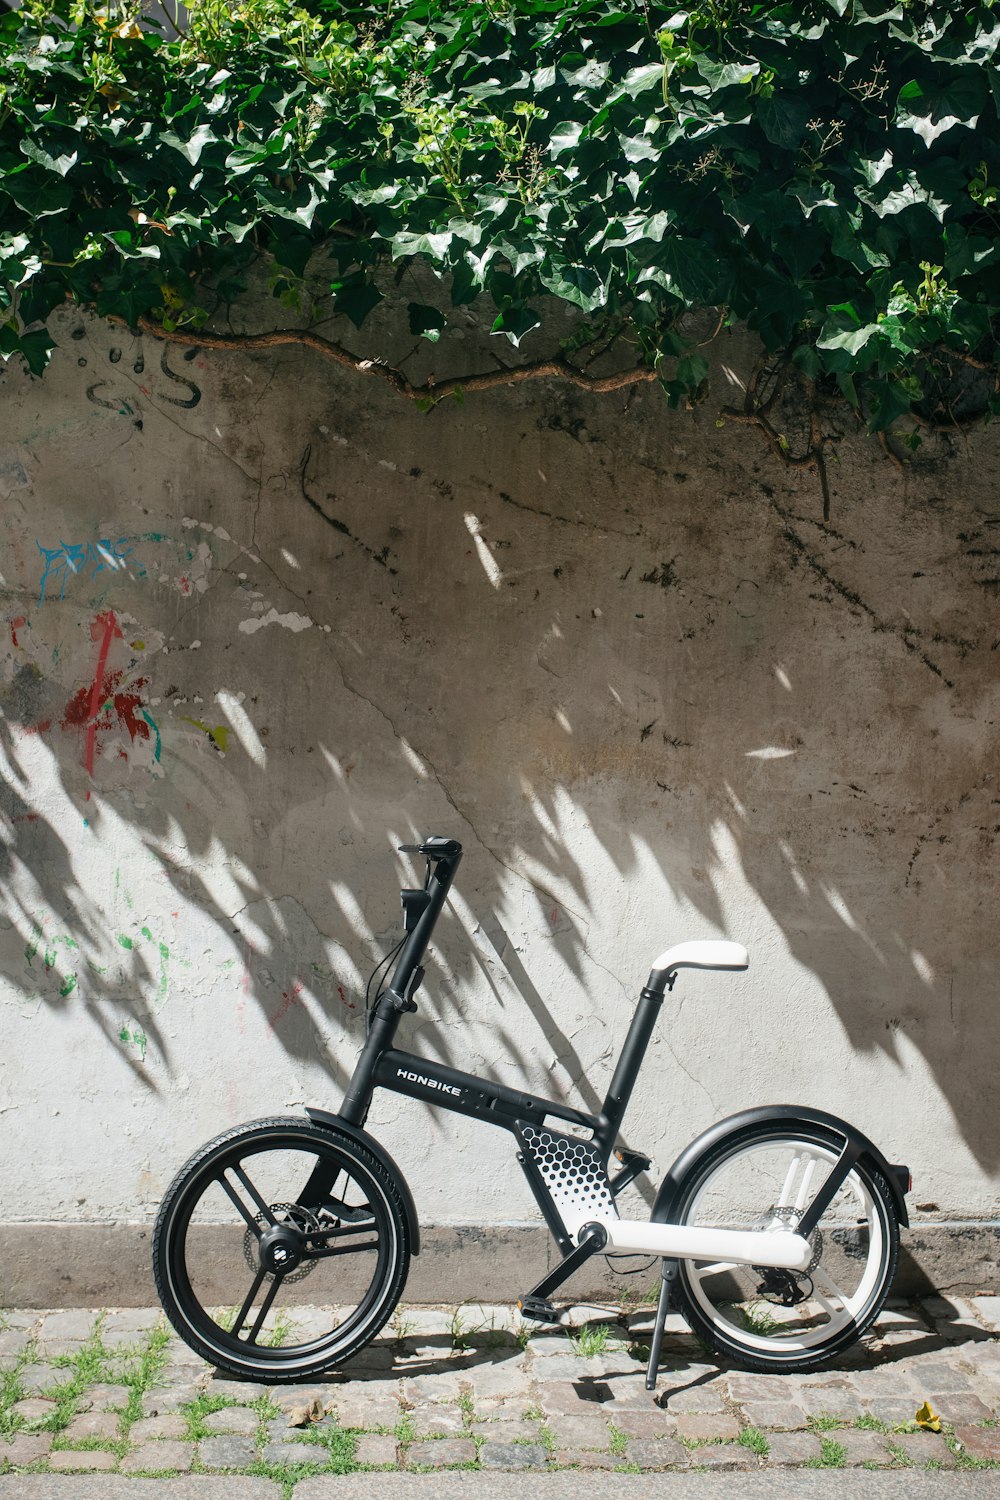 a bicycle leaning against a wall with graffiti on it